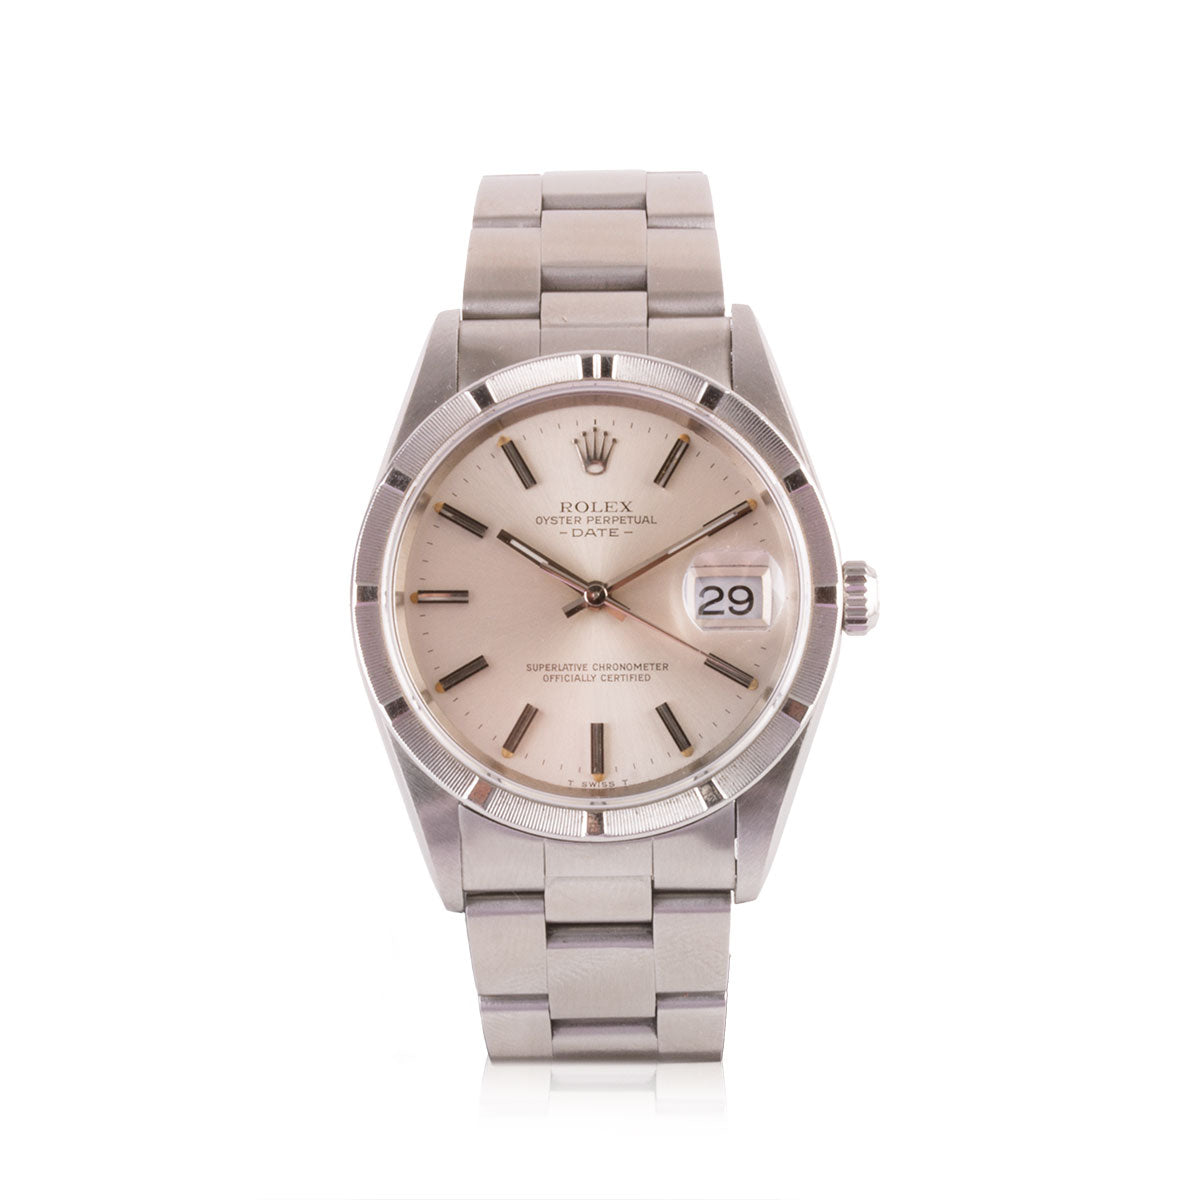 Montre d'occasion - Rolex - Oyster Perpetual Date - 4950€